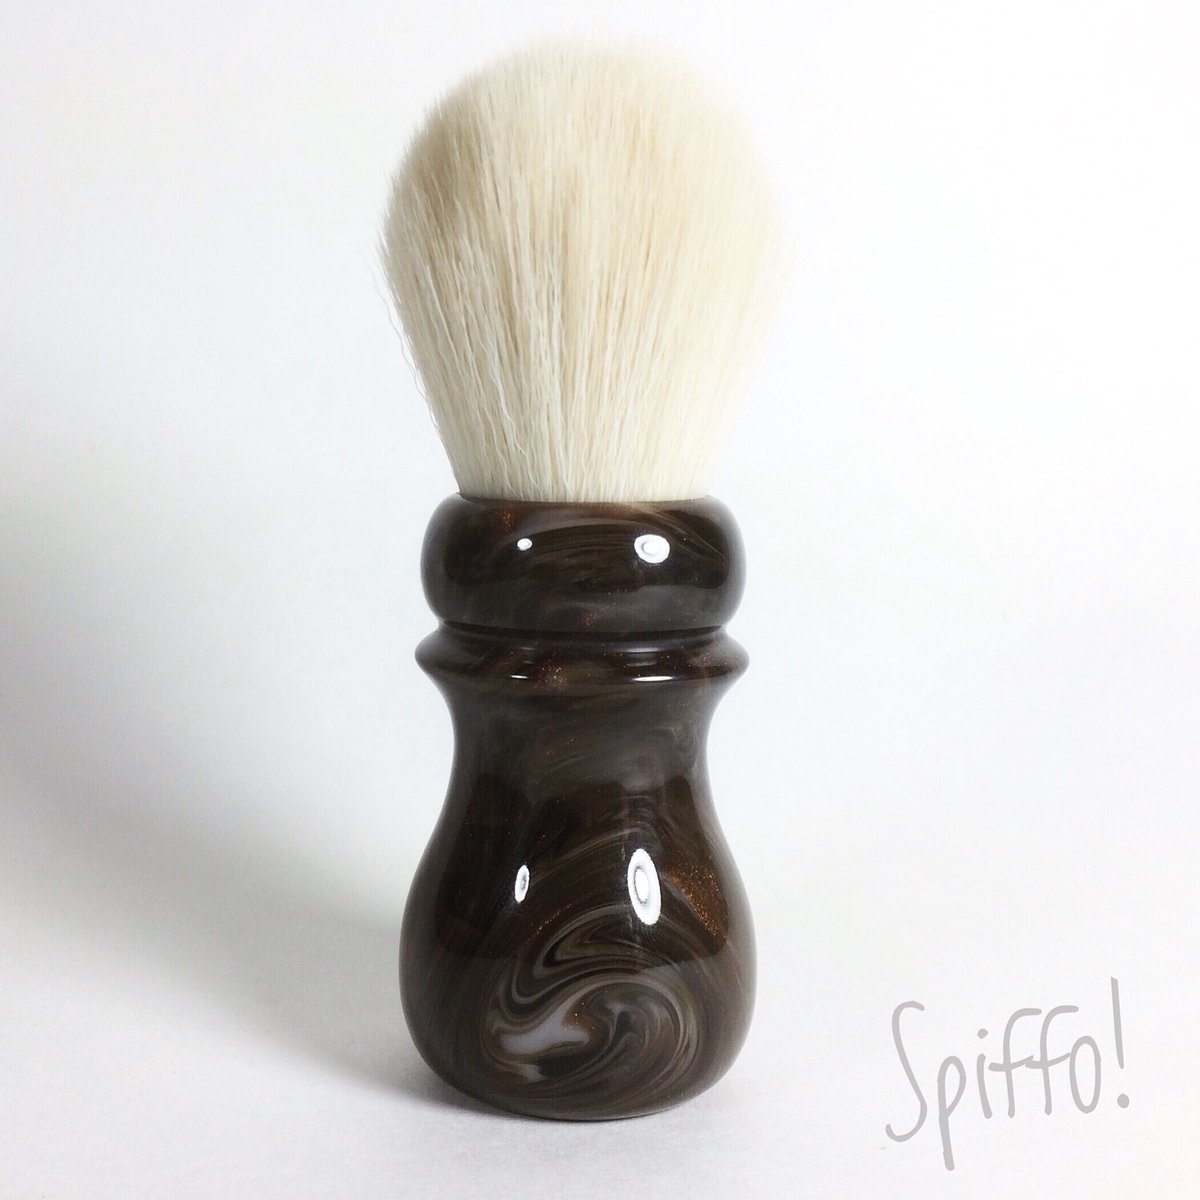 A low loft Cashmere loaded in a chocolate malt! 👊😎 #spiffo #spiffoman #shave #shaving #wetshaving #halifaxcrafters #hfxcrafters #halifax #halifaxnoise #hfx #dartmouth #madeincanada #madeinnovascotia #fathersday #giftsformen #giftsforhim #giftsfordad #giftsforguys